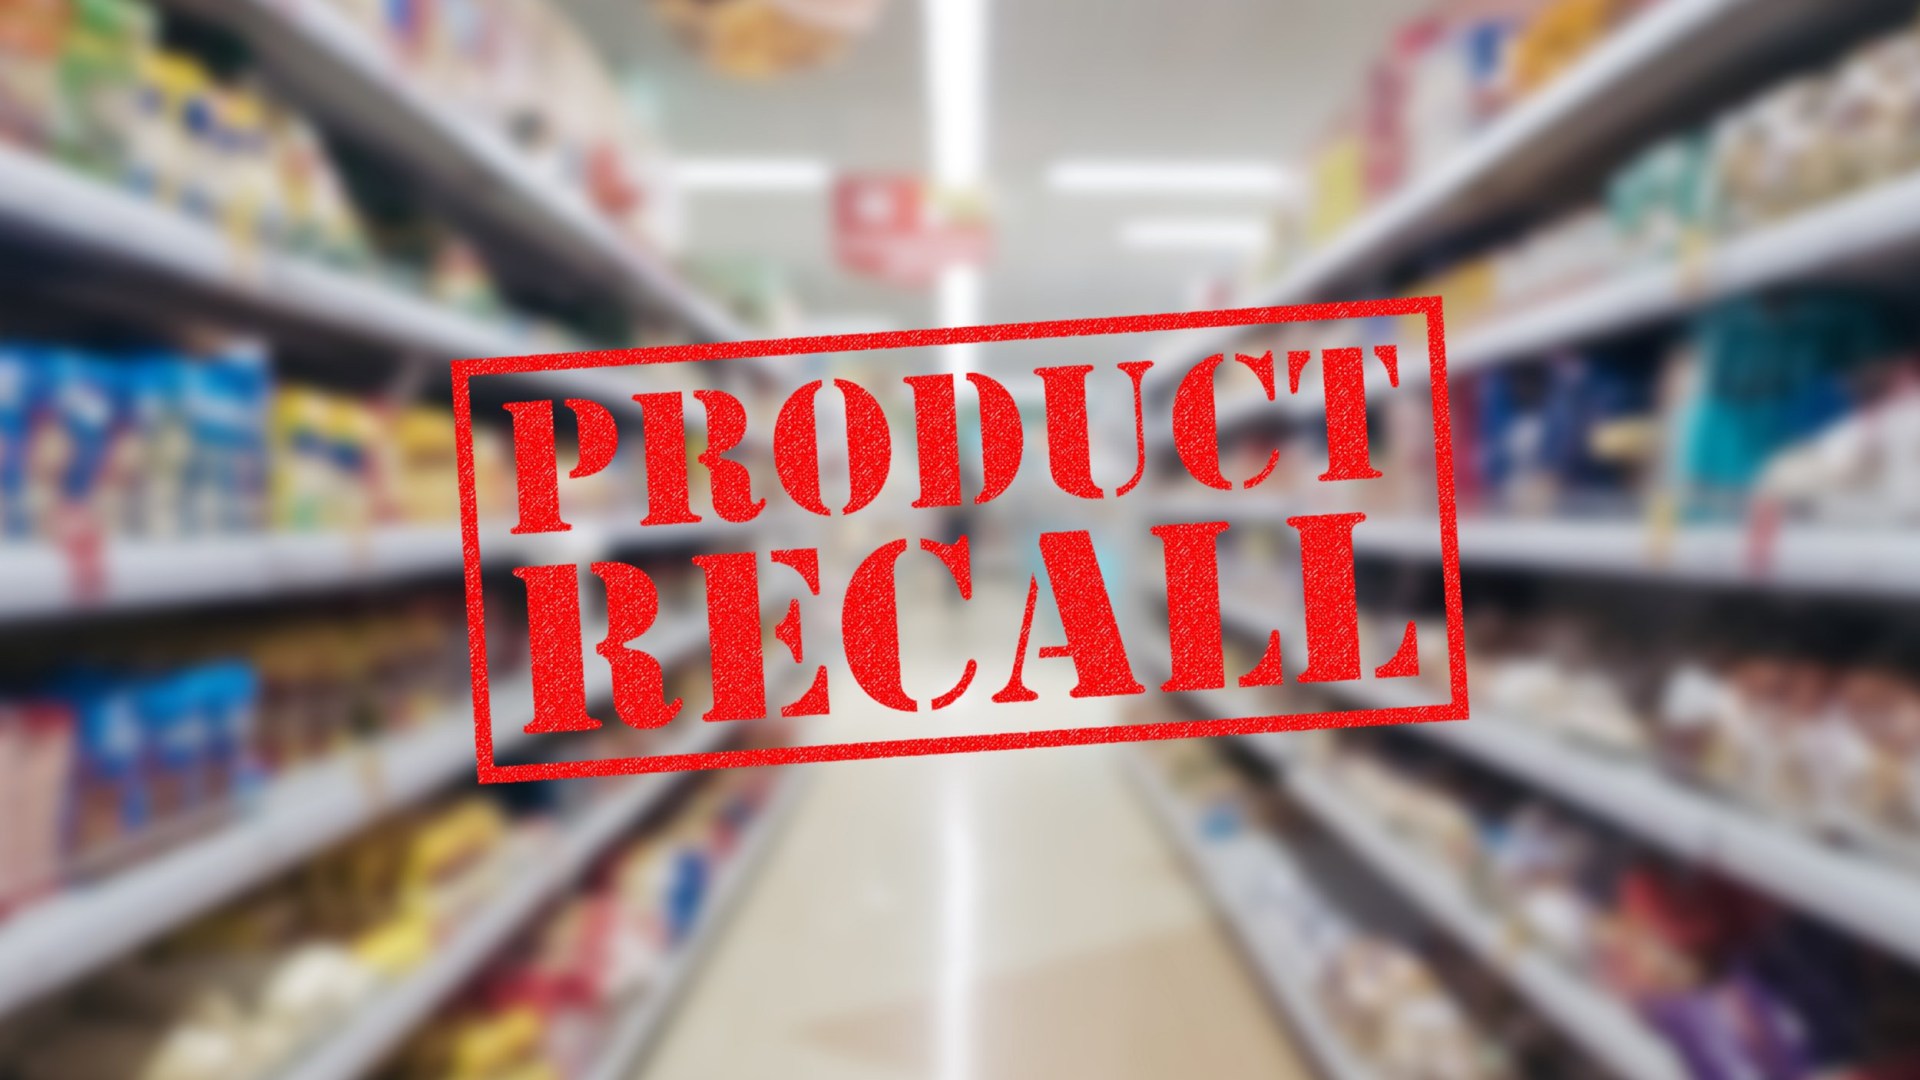 Urgent recall on large number of household staples across popular brands over ‘presence of metal pieces’ health risk [Video]